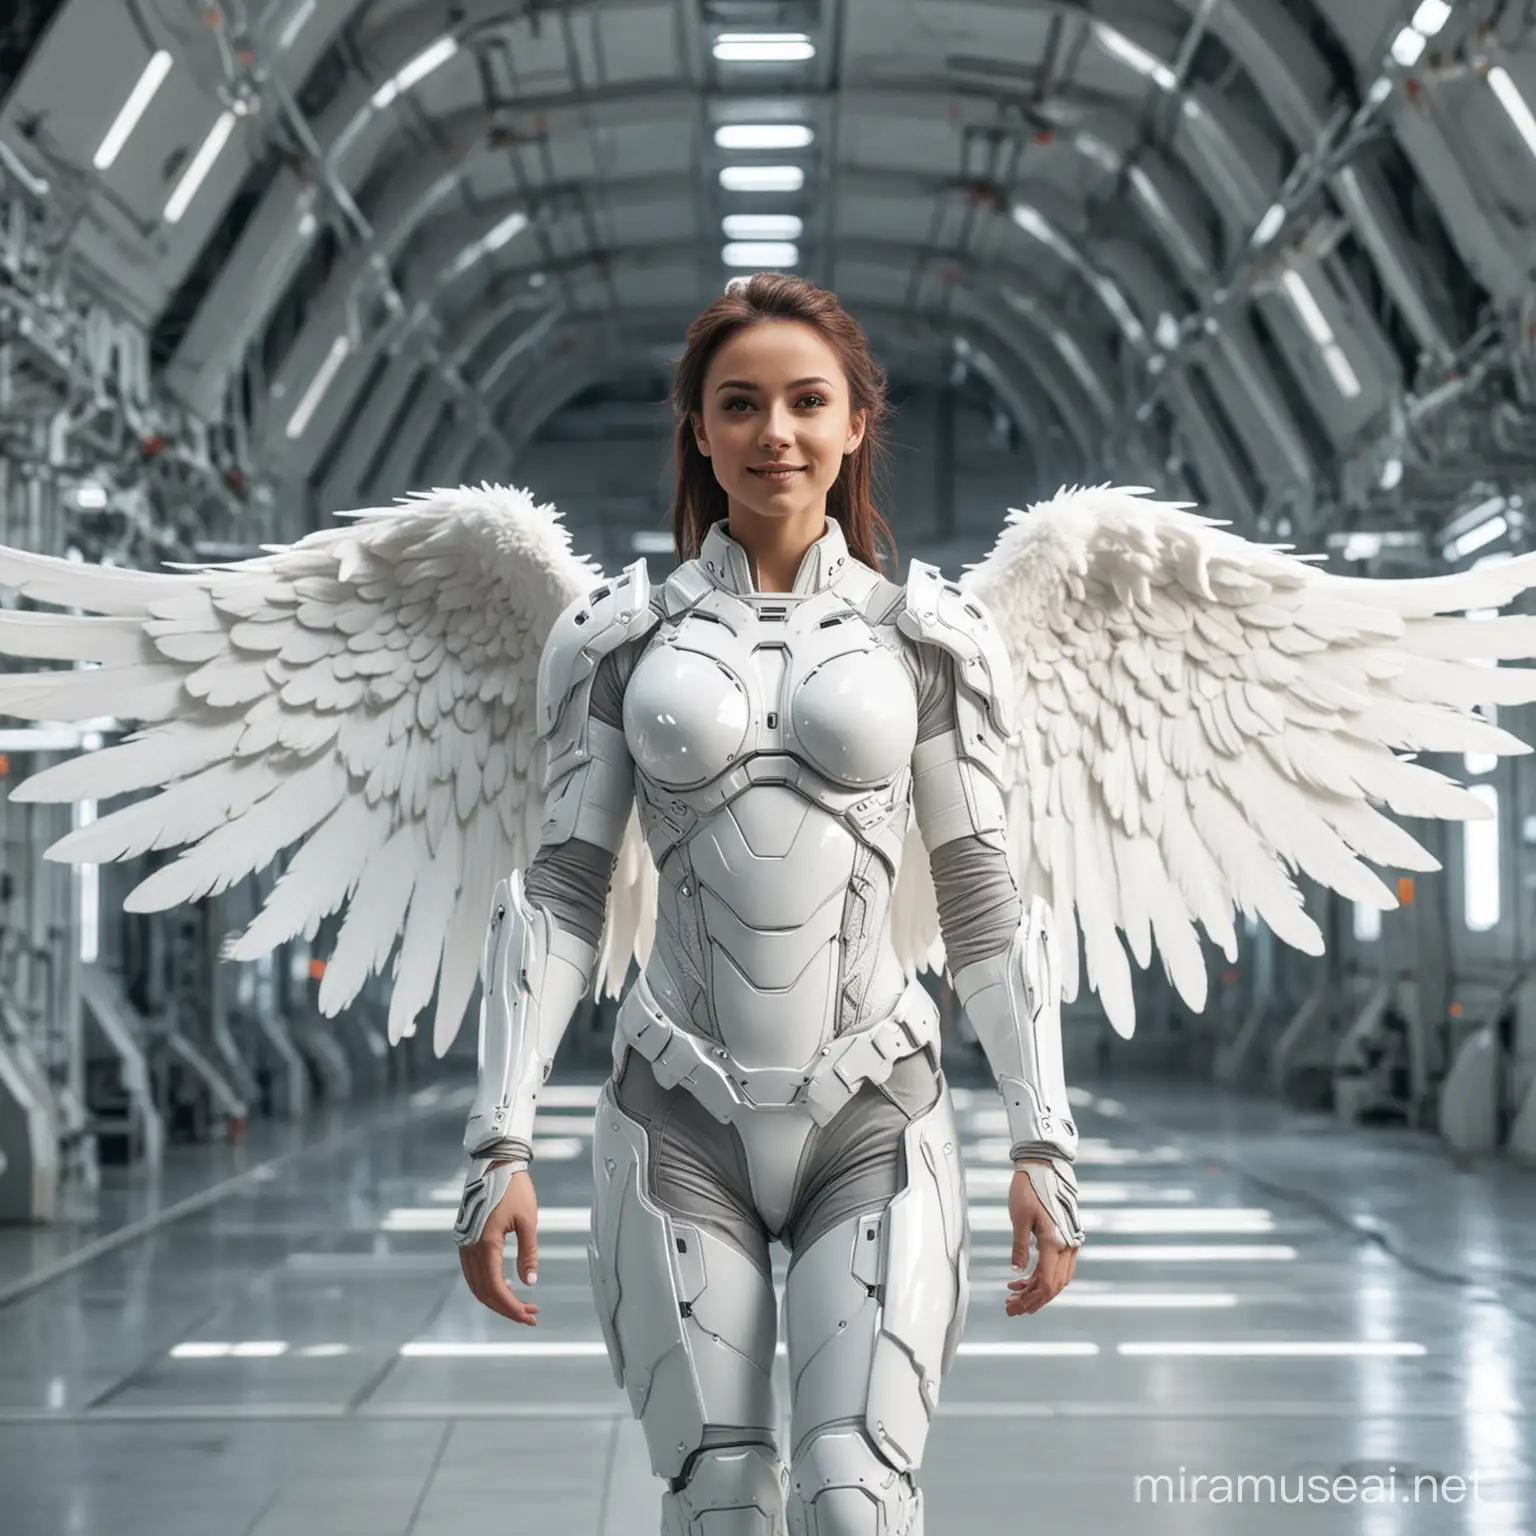 Futuristic Female Angel in White Armor Stands Tall in Space Station Hall